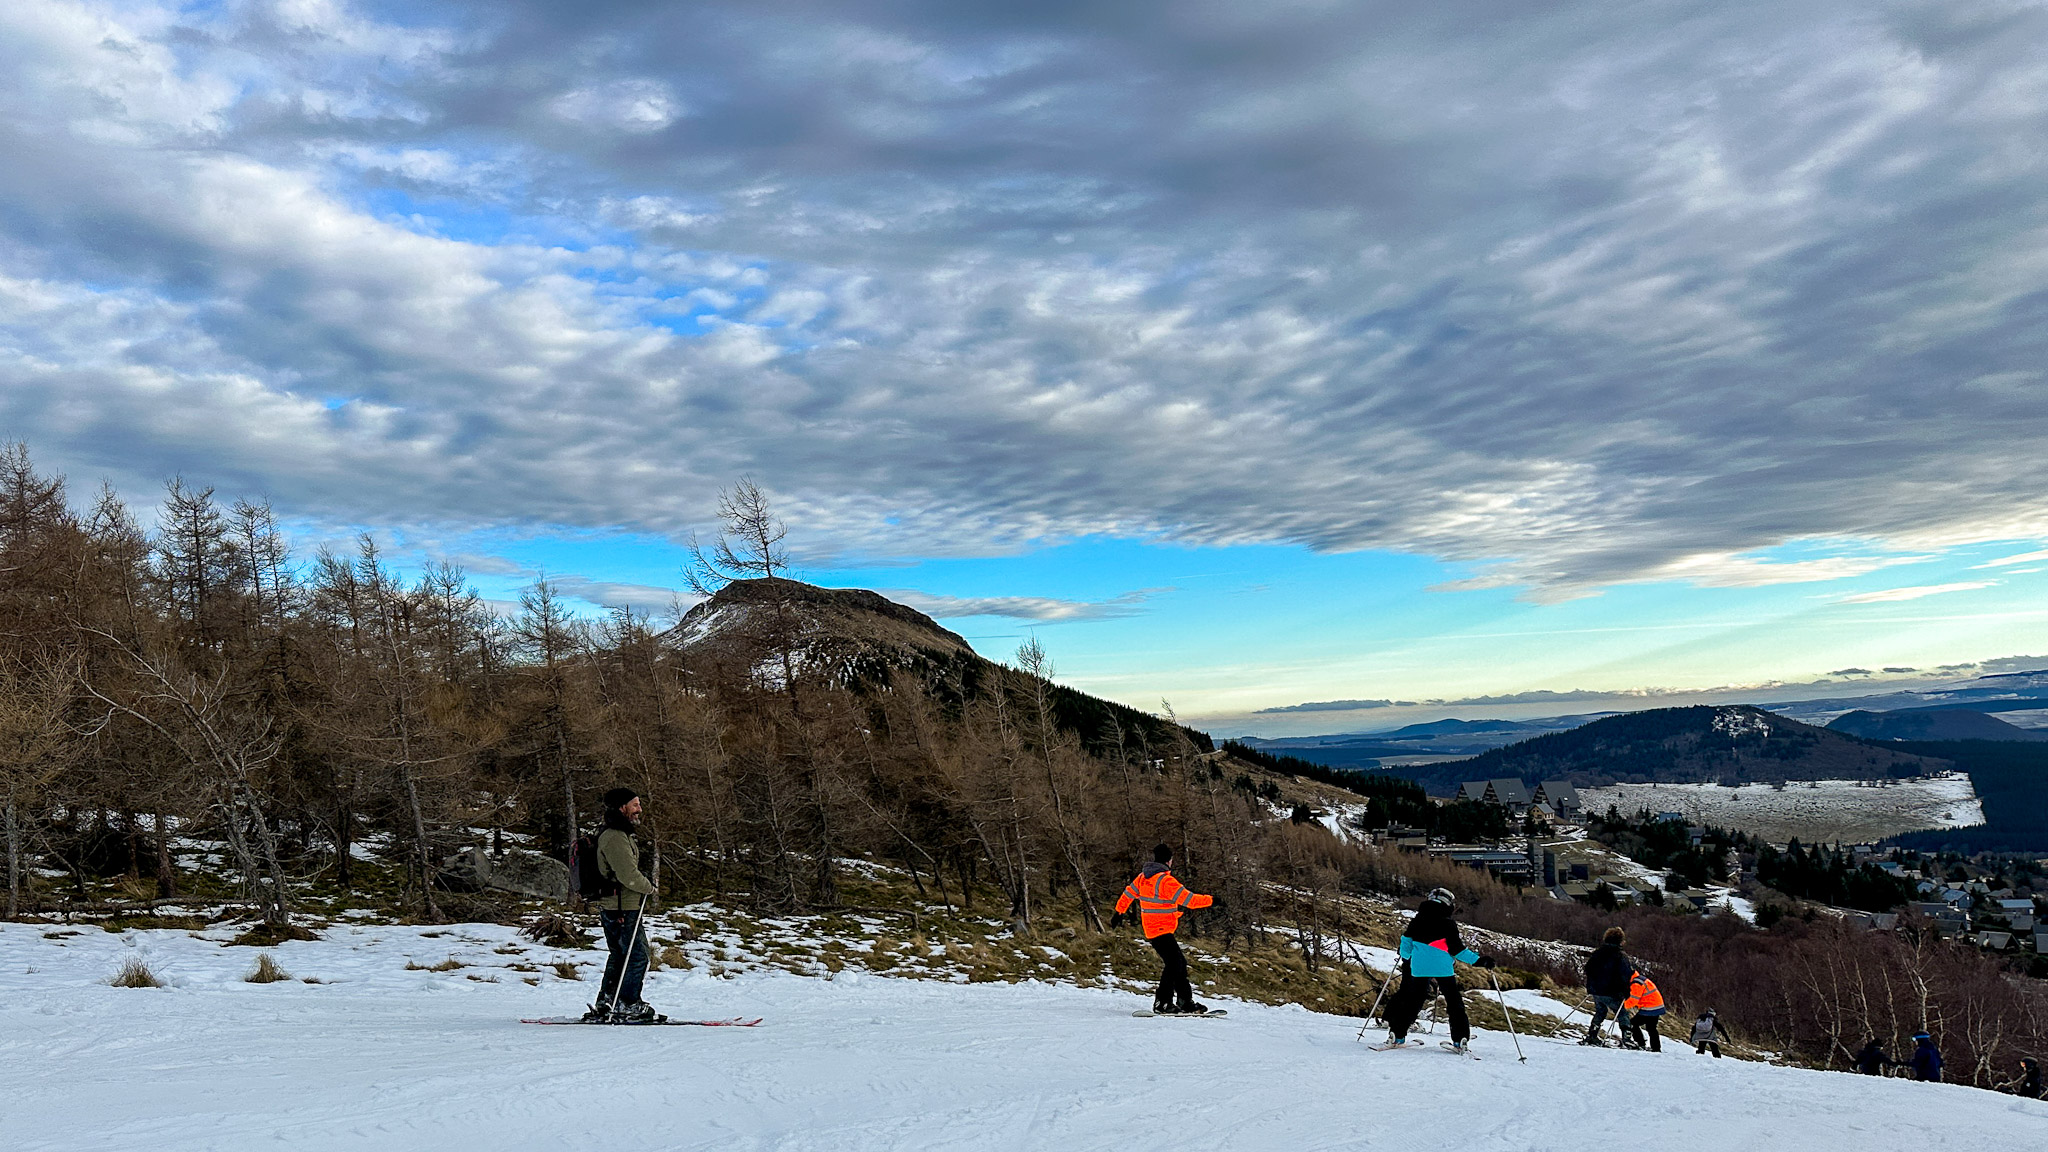 Super Besse, alpine skiing at the foot of the Puy du Chambourguet